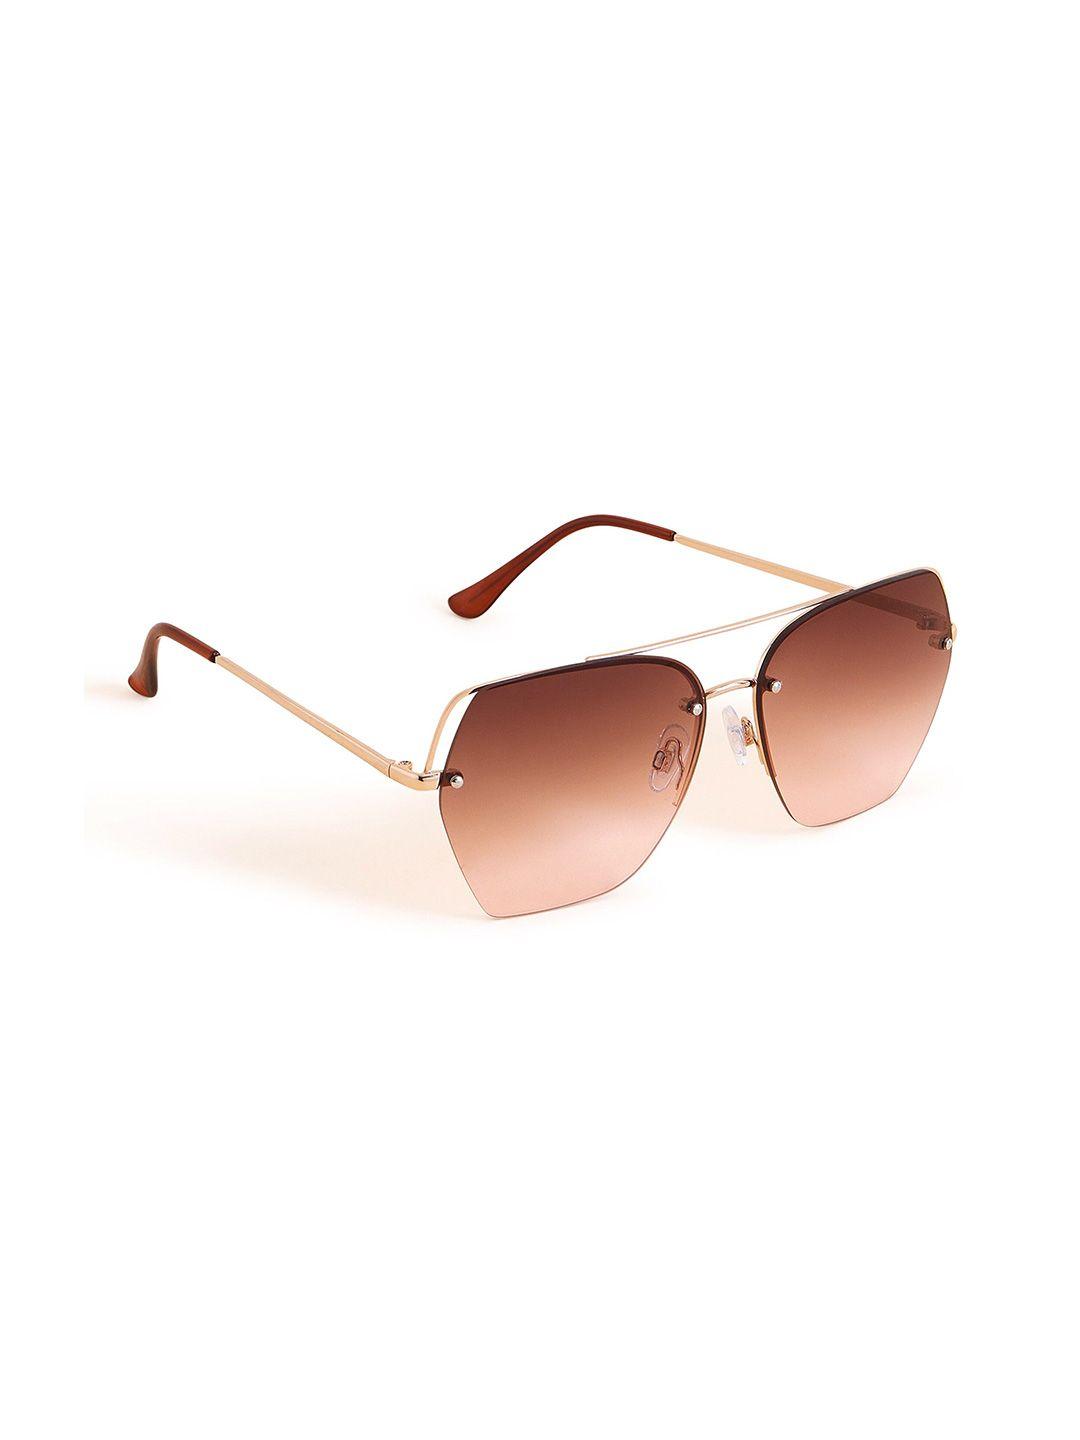 accessorize women aviator sunglasses with uv protected lens ma-59306281001